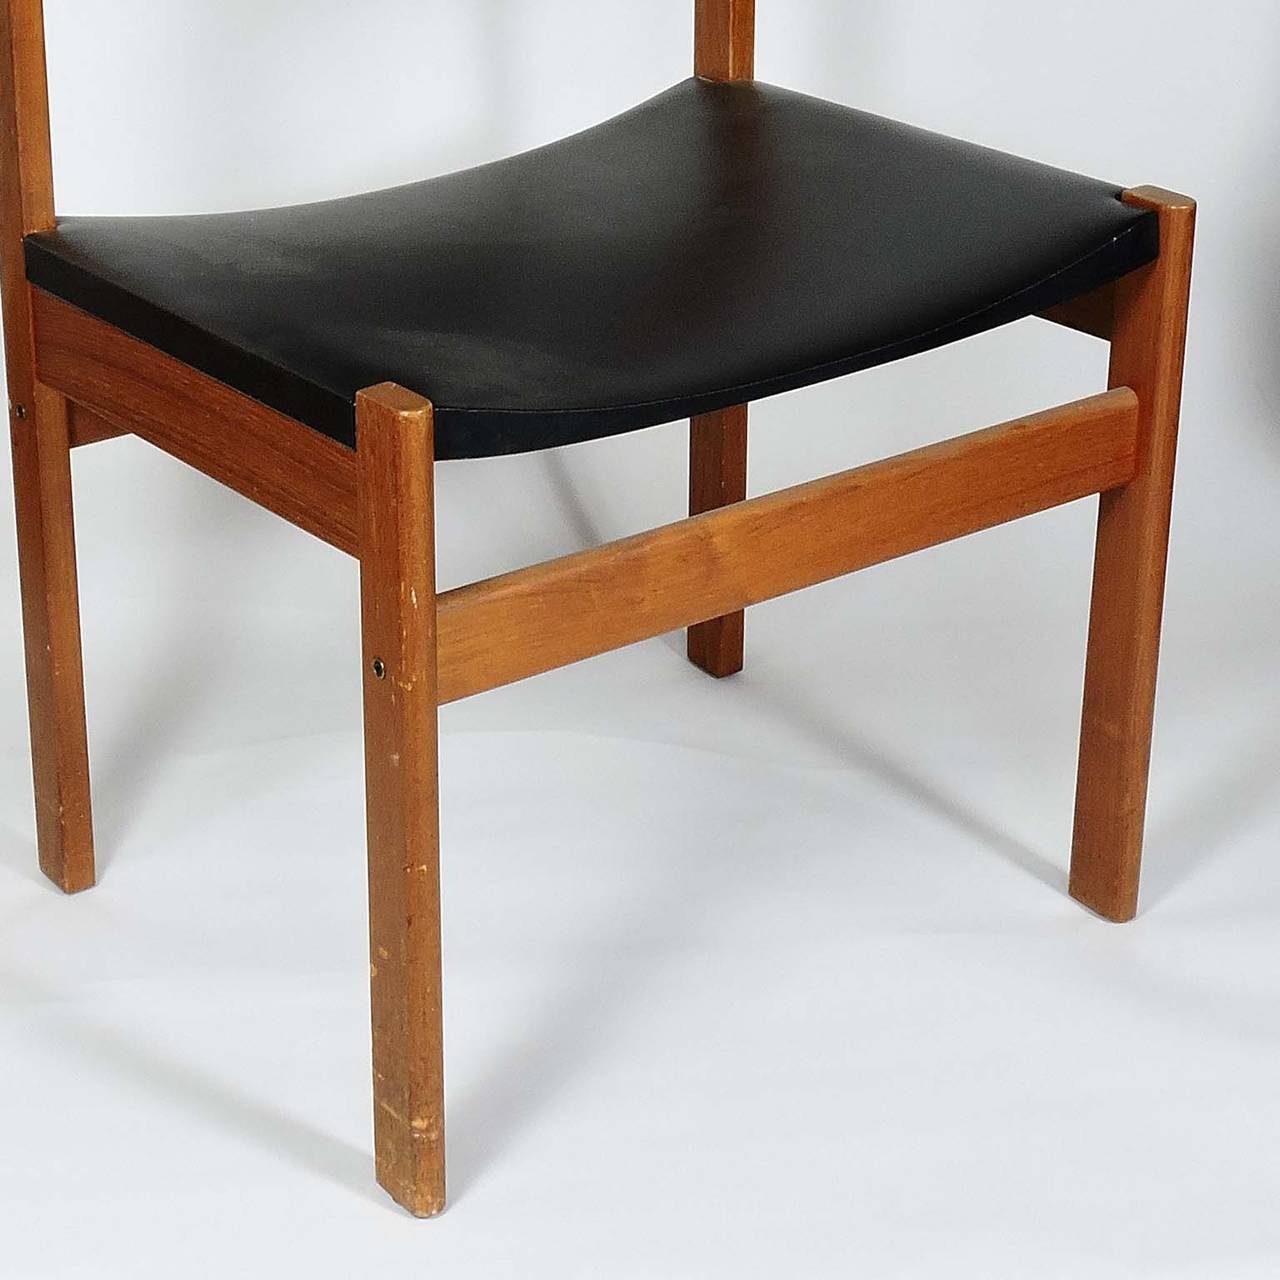 Set of four Danish Mid-Century Modern teak and leather dining chairs, by G. P. Farum, Denmark. Label on underside marked 